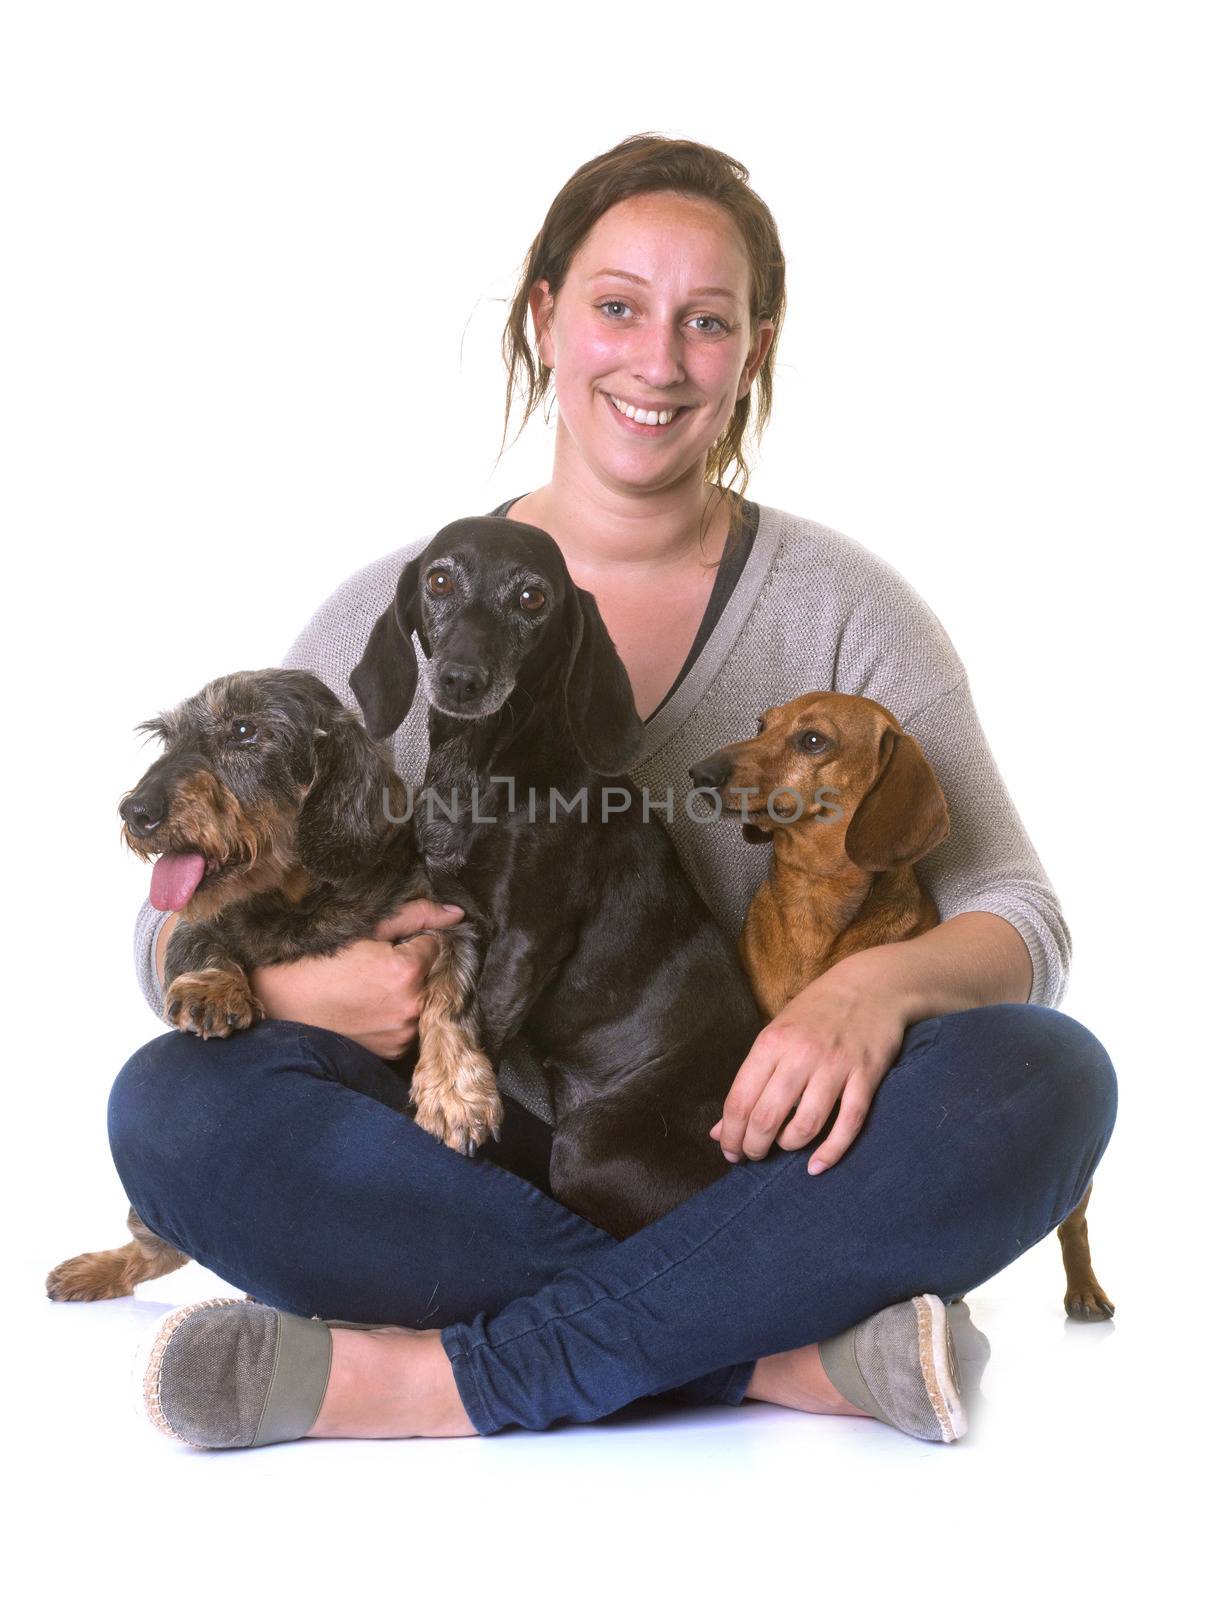 woman and dachshunds in front of white background